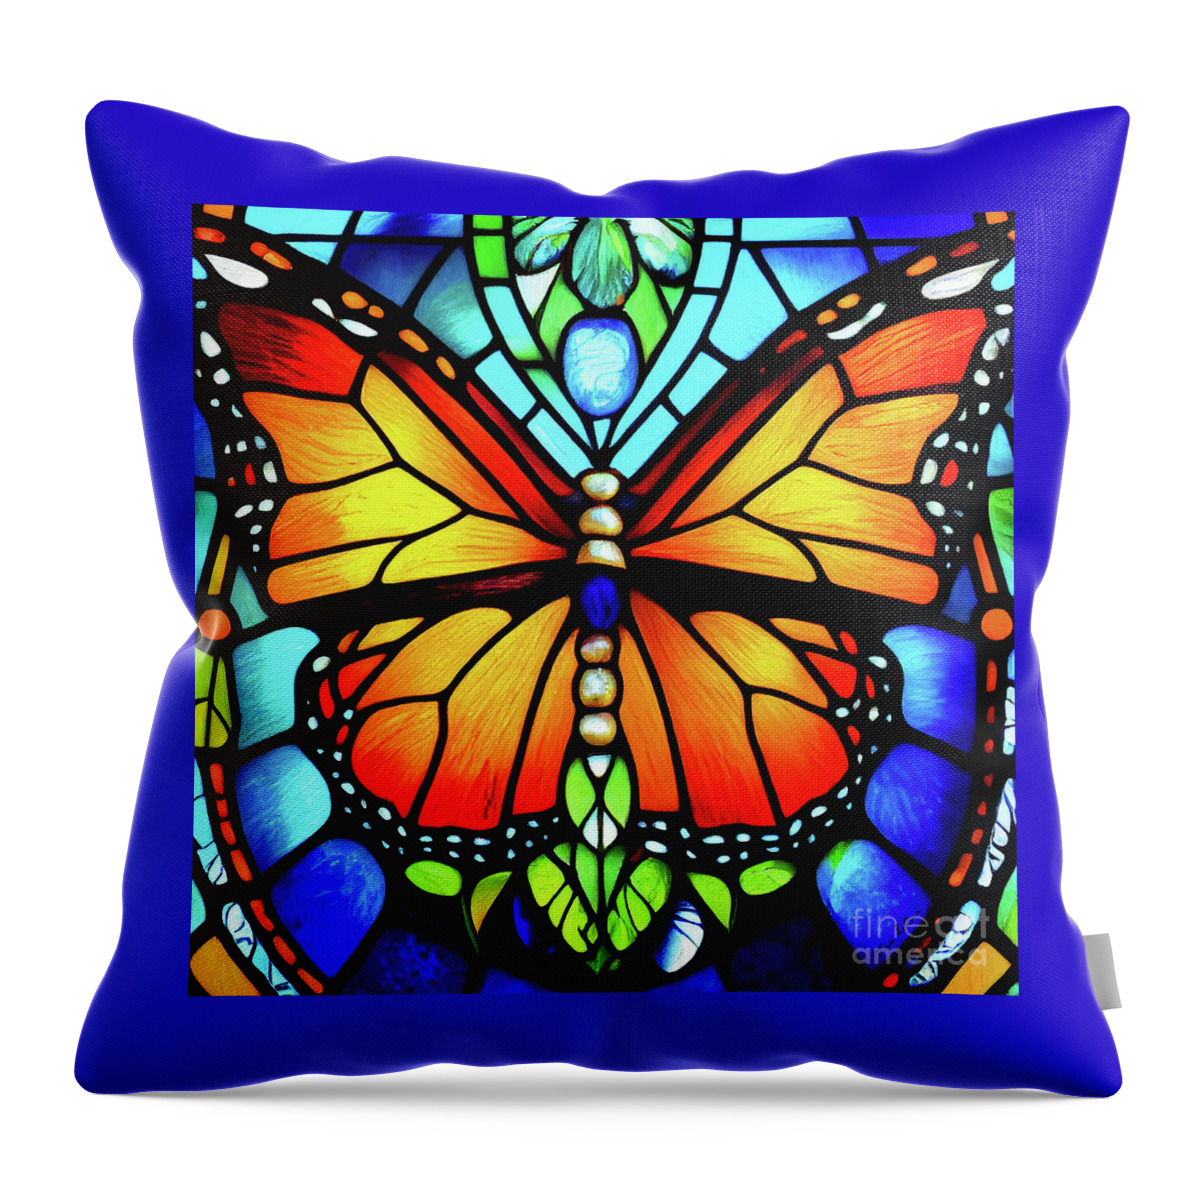 Stained Glass Monarch Throw Pillow featuring the glass art Stained Glass Monarch by Tina LeCour